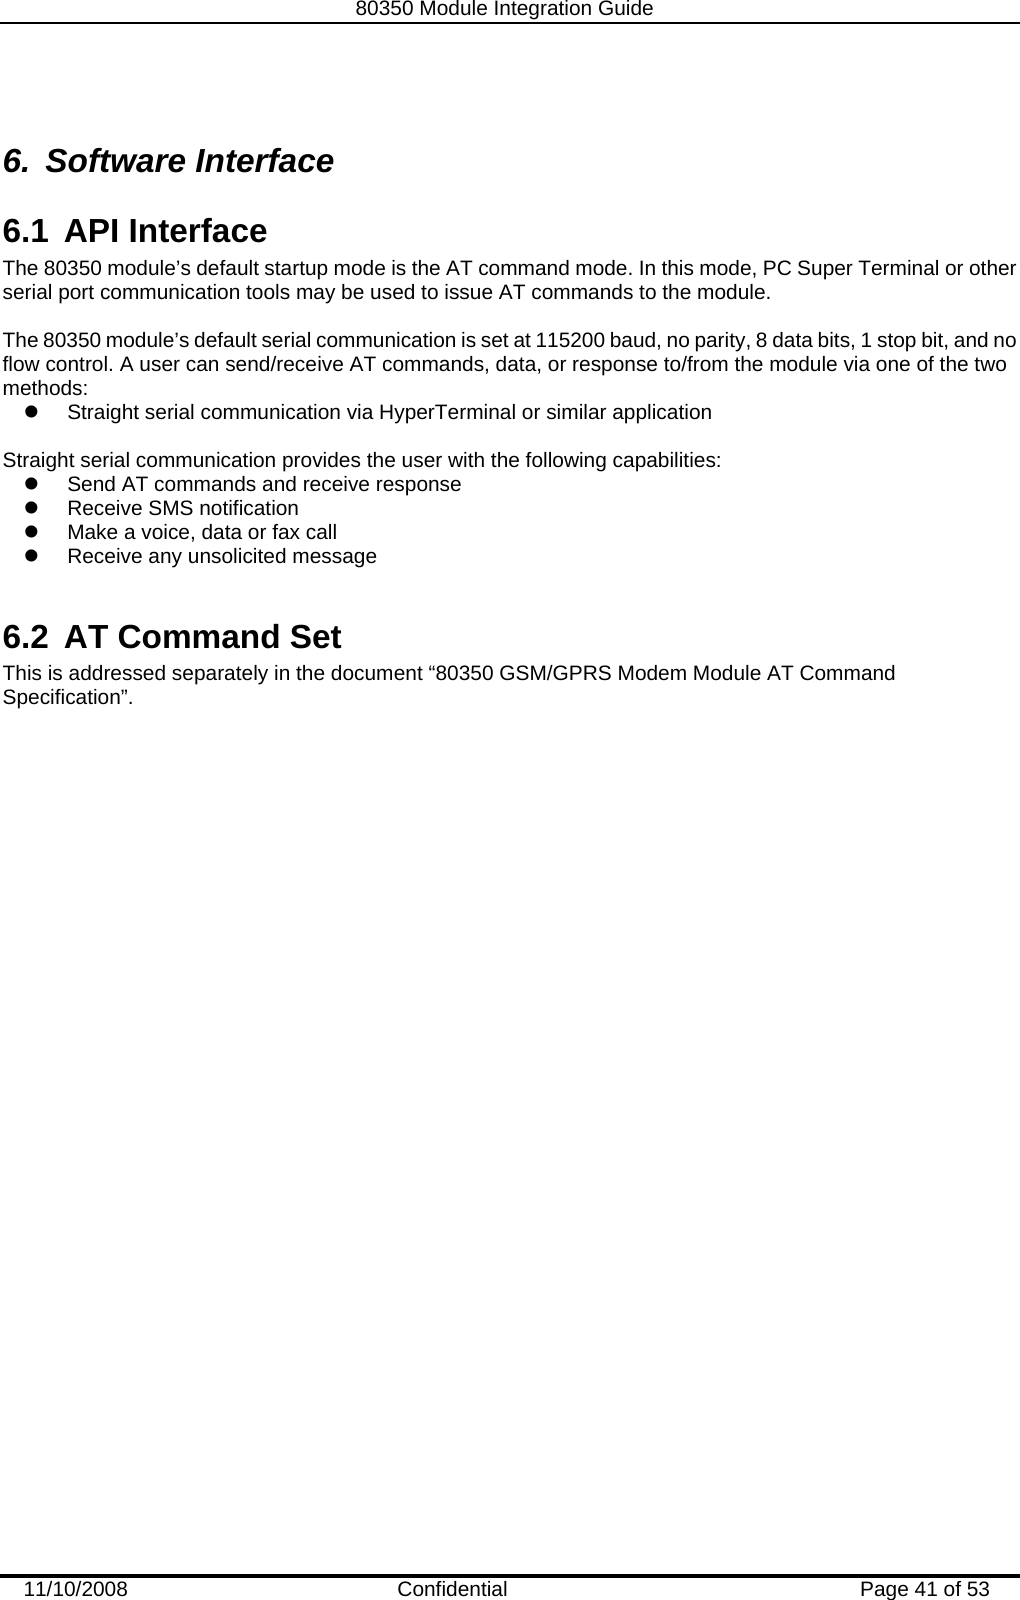   80350 Module Integration Guide  11/10/2008    Confidential  Page 41 of 53  6. Software Interface 6.1 API Interface The 80350 module’s default startup mode is the AT command mode. In this mode, PC Super Terminal or other serial port communication tools may be used to issue AT commands to the module.  The 80350 module’s default serial communication is set at 115200 baud, no parity, 8 data bits, 1 stop bit, and no flow control. A user can send/receive AT commands, data, or response to/from the module via one of the two methods:  z  Straight serial communication via HyperTerminal or similar application   Straight serial communication provides the user with the following capabilities:  z  Send AT commands and receive response  z  Receive SMS notification  z  Make a voice, data or fax call  z  Receive any unsolicited message   6.2  AT Command Set This is addressed separately in the document “80350 GSM/GPRS Modem Module AT Command Specification”.  